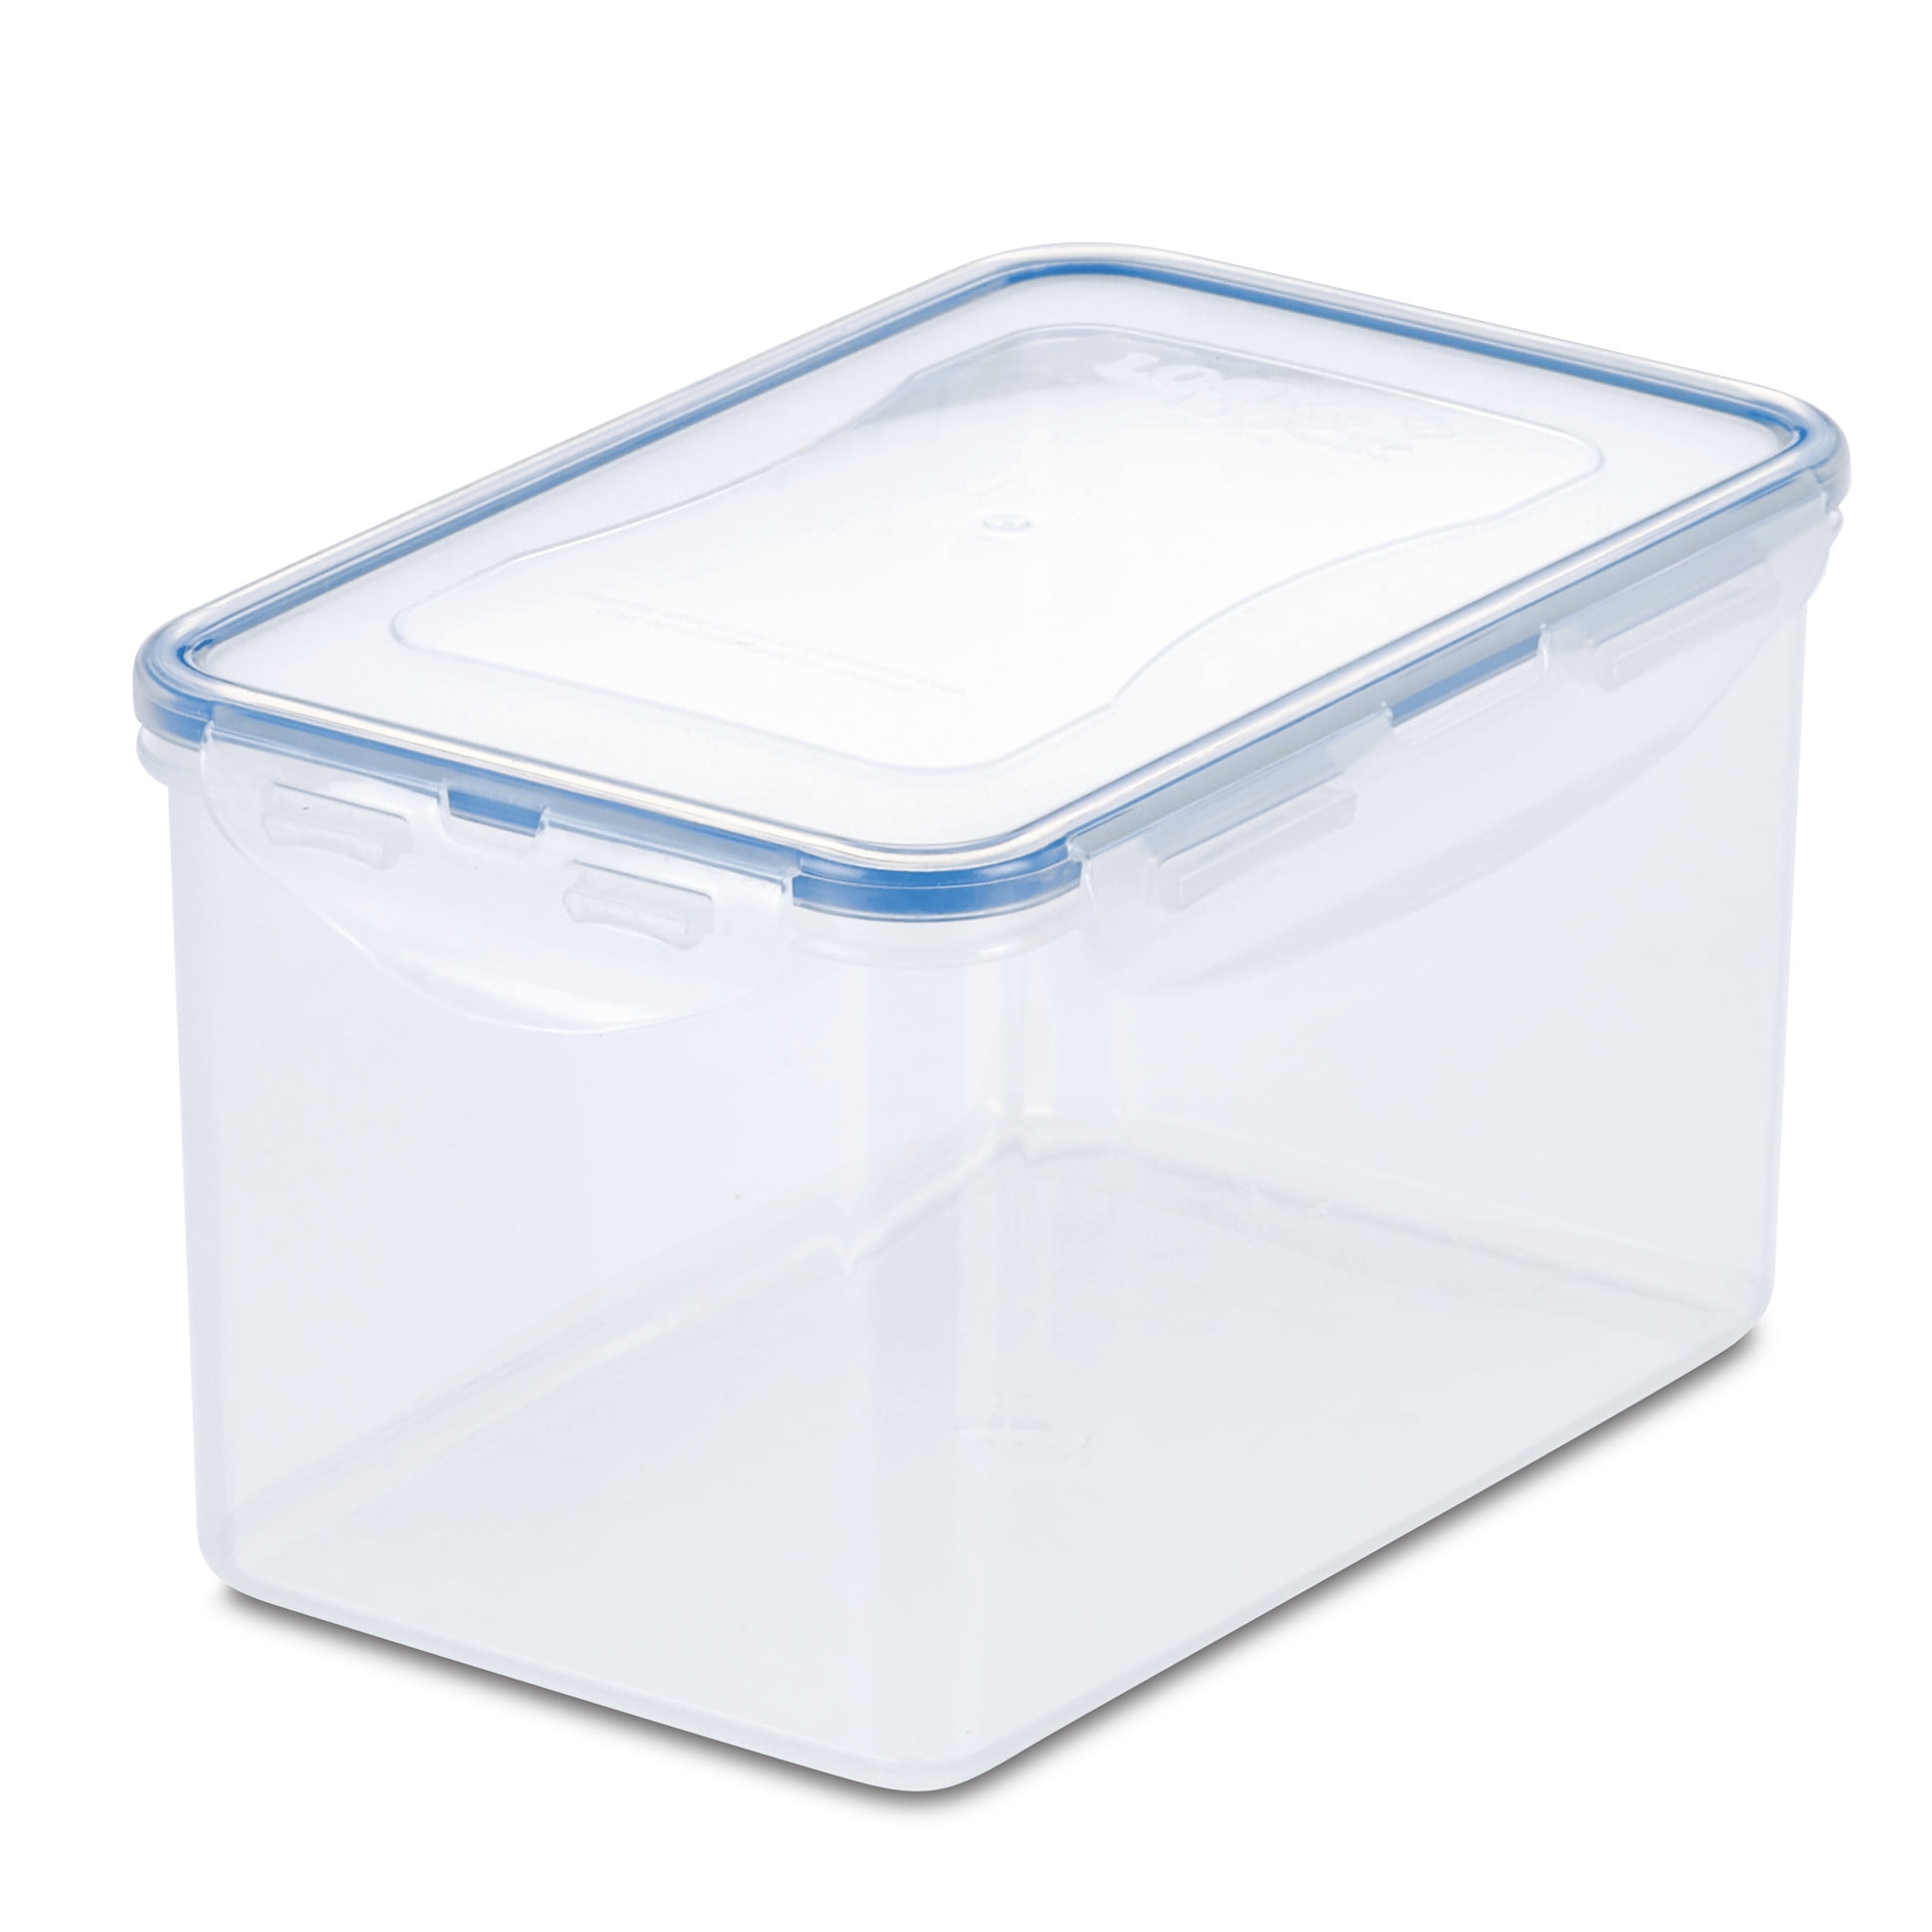 Large Stainless Steel Airtight Rectangular Freezer Storage Container - 3.8 L / 0.83 Gal